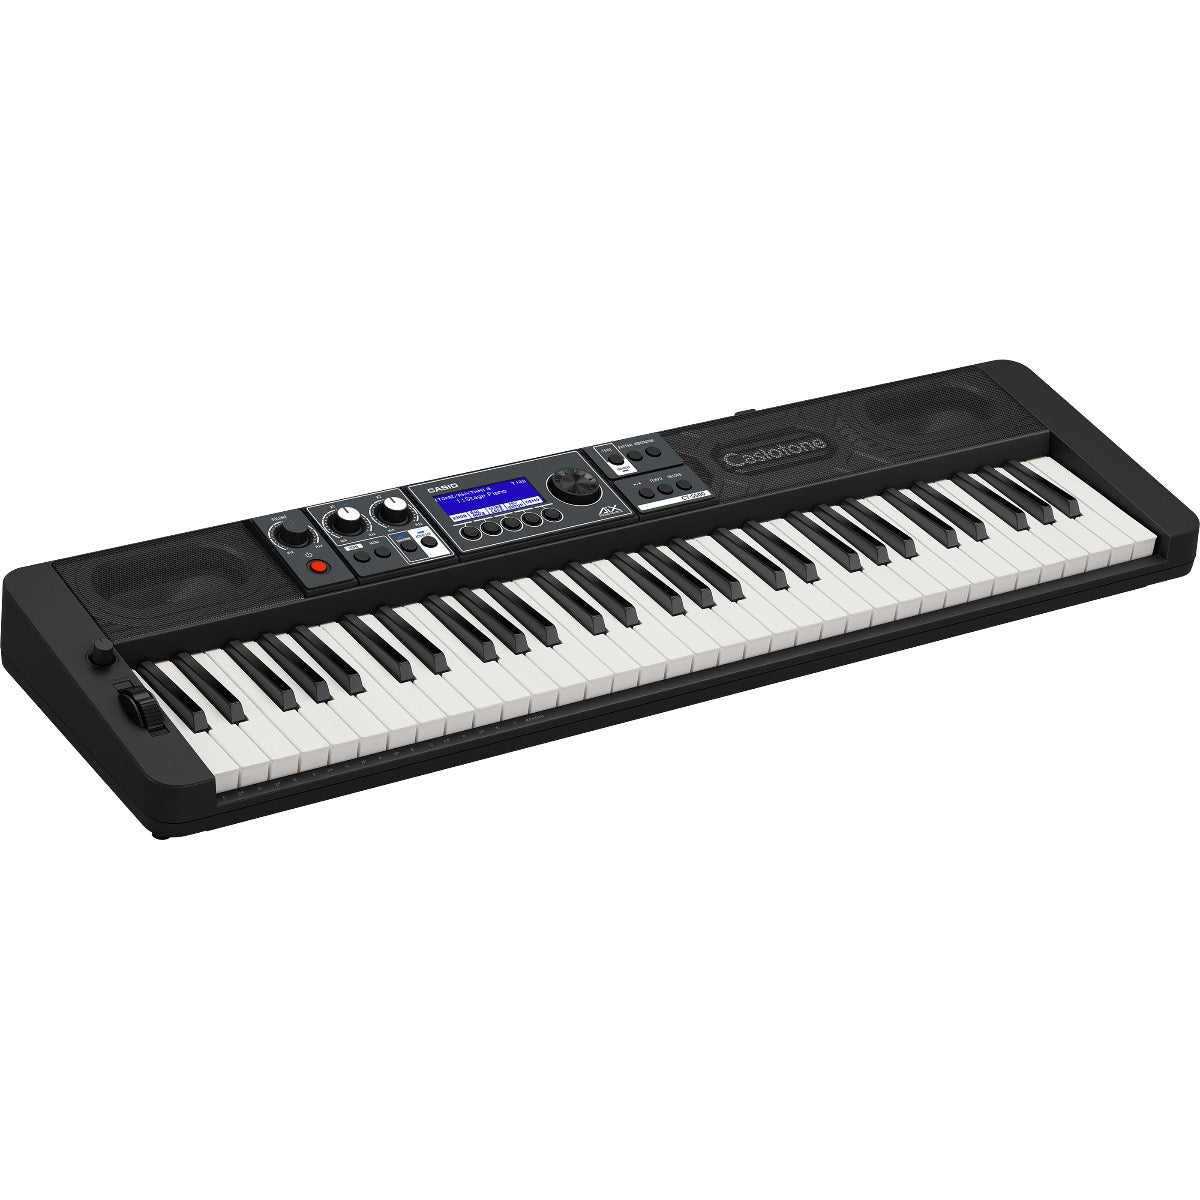 Casio Casiotone CT-S500 Portable Keyboard view 2